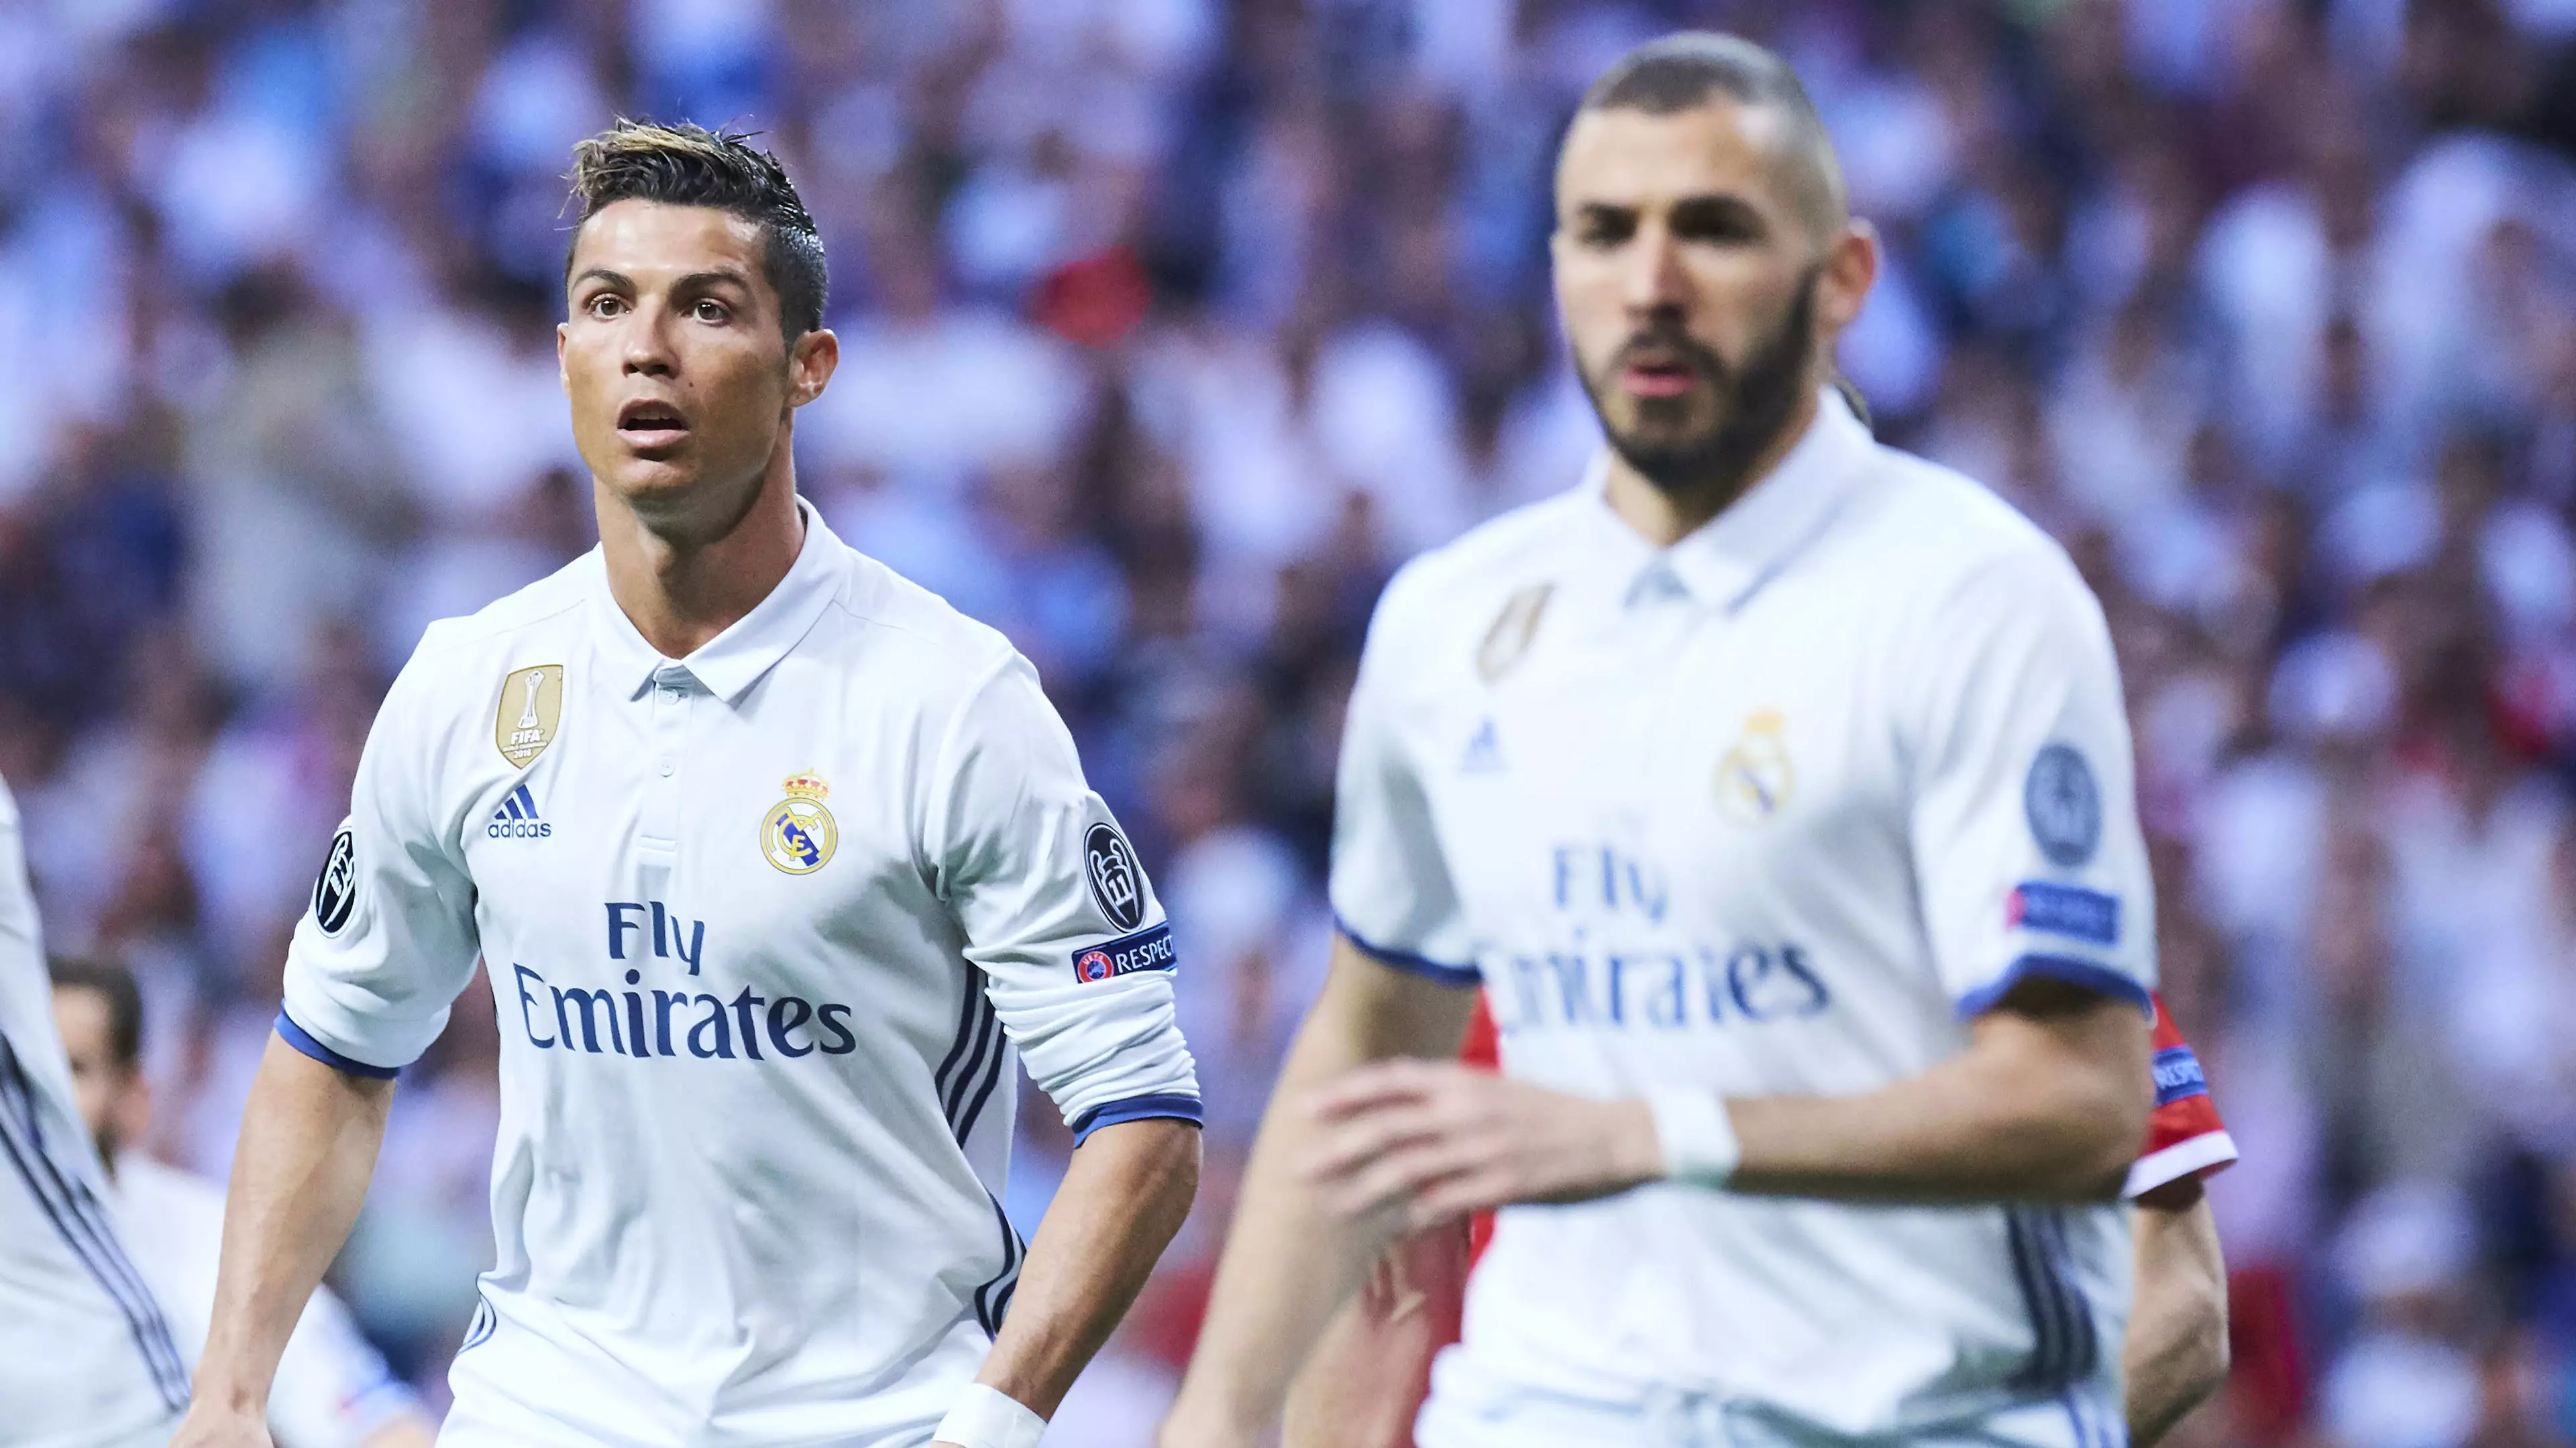 Karim Benzema Opens Up On What It Was Like To Play Second-Fiddle To Cristiano Ronaldo